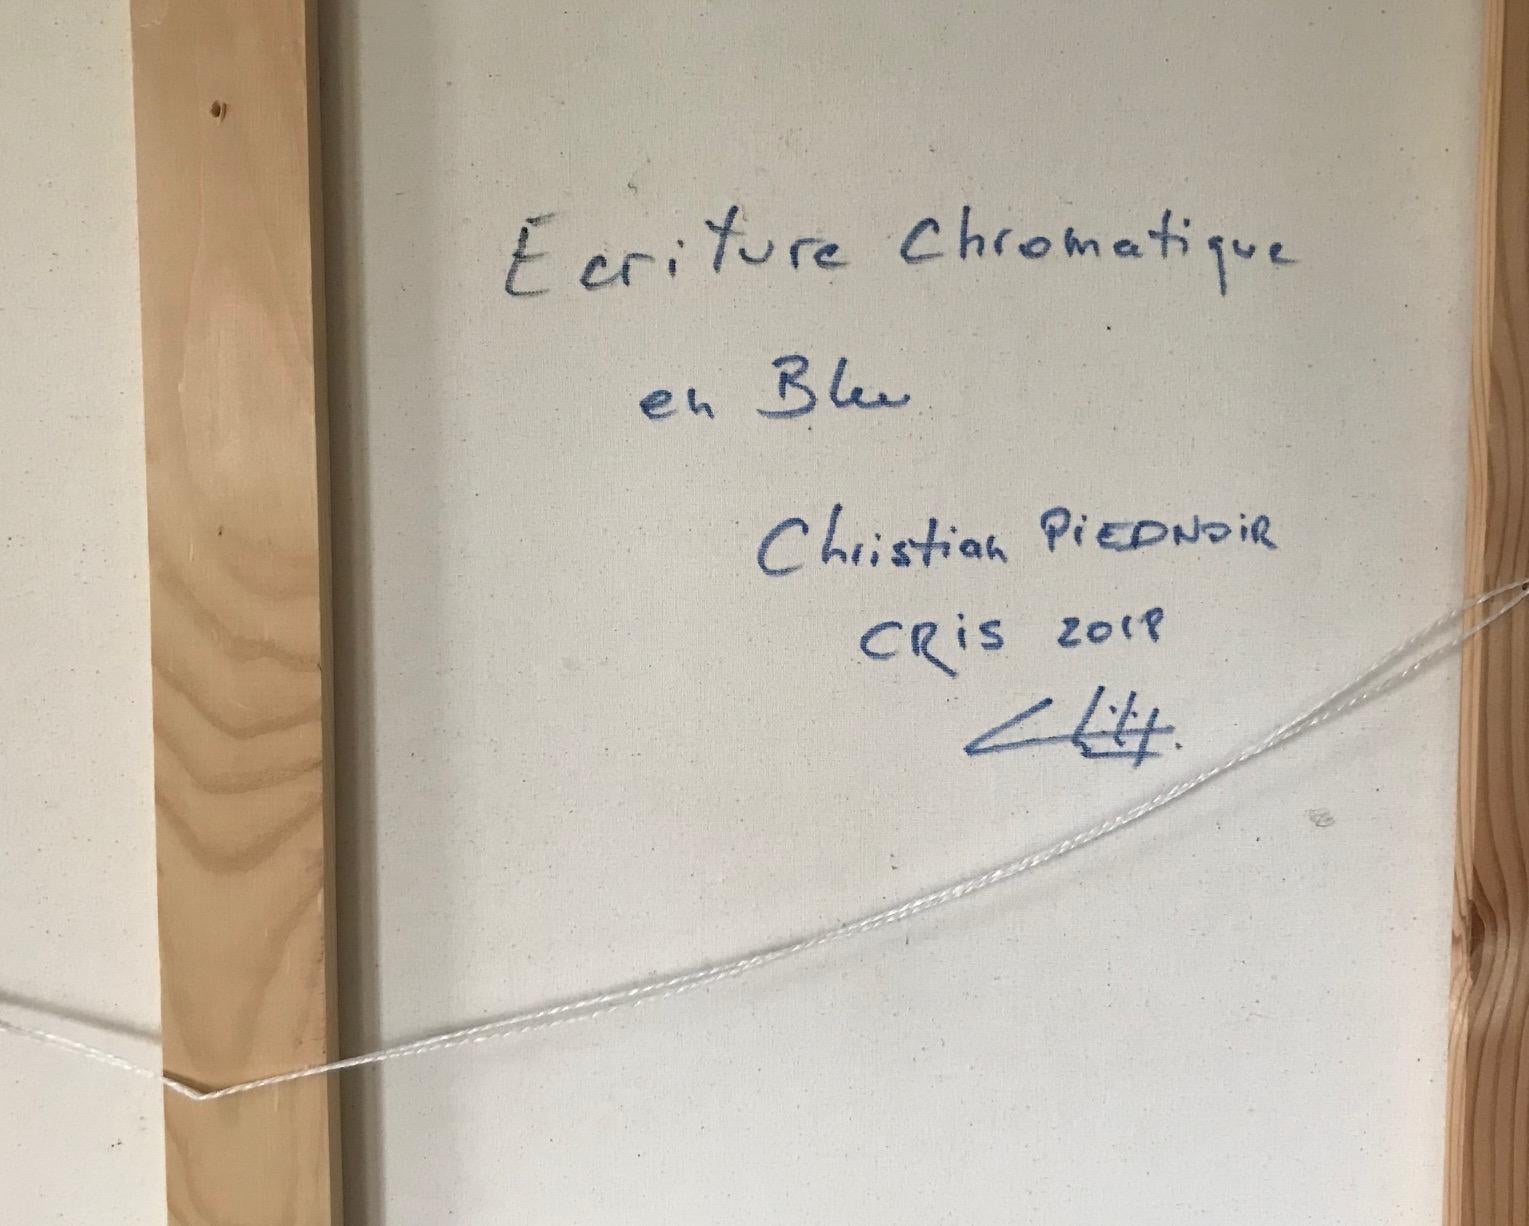 'Ecriture chromatique en bleu' is an original unique acrylic on canvas painting by Christian Piednoir painted in 2017.

In the words of the artist describing his artistic approach.

It all starts with the magic of the first brushstroke on the